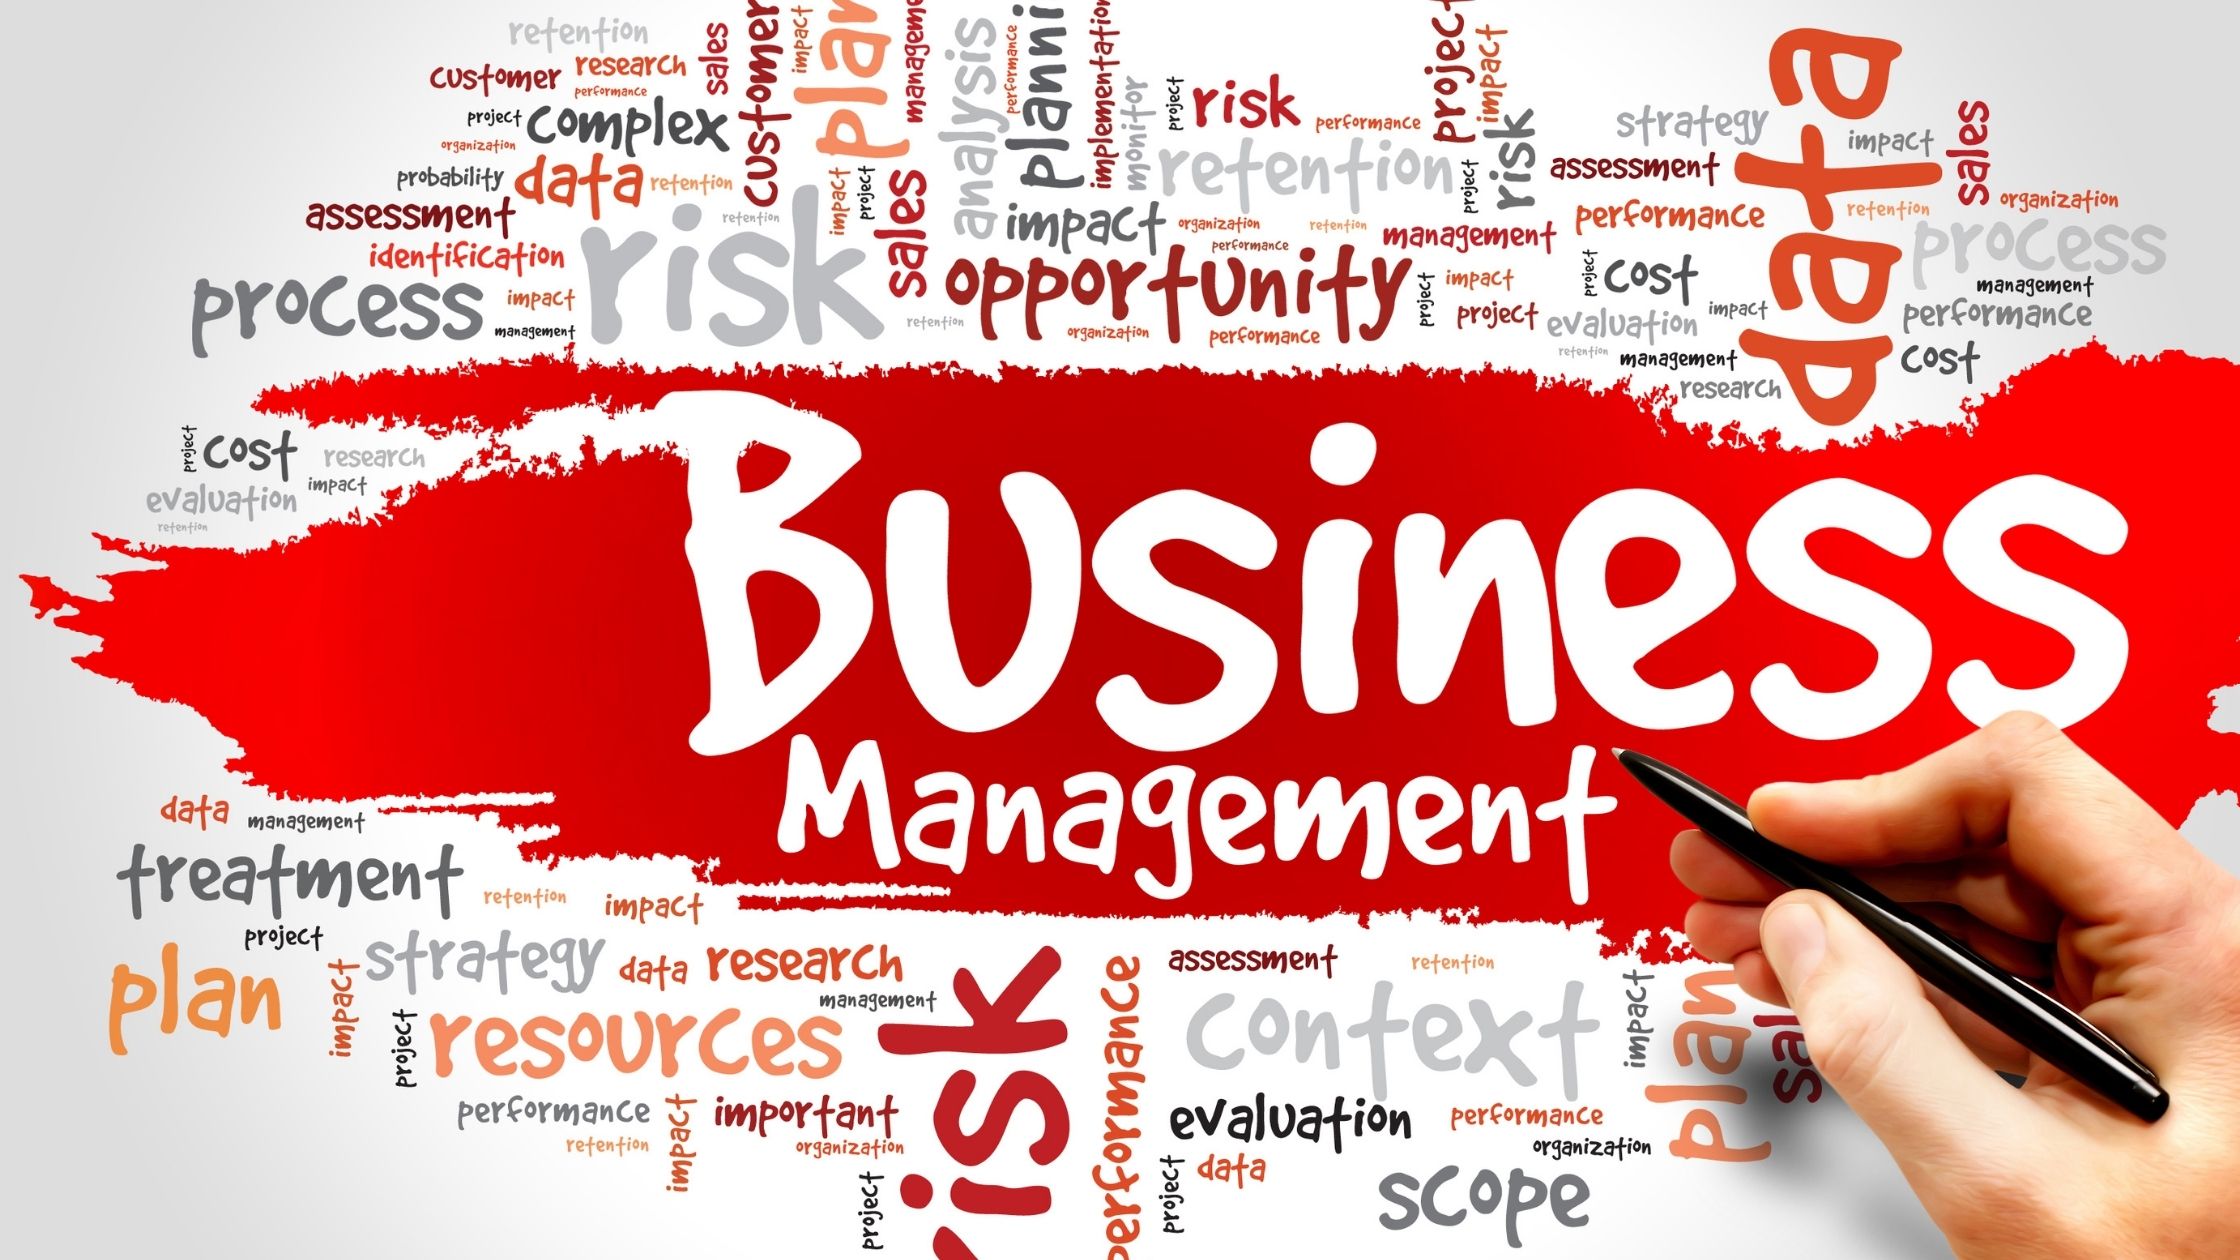 Effective Management is Must for any Business to Succeed in the